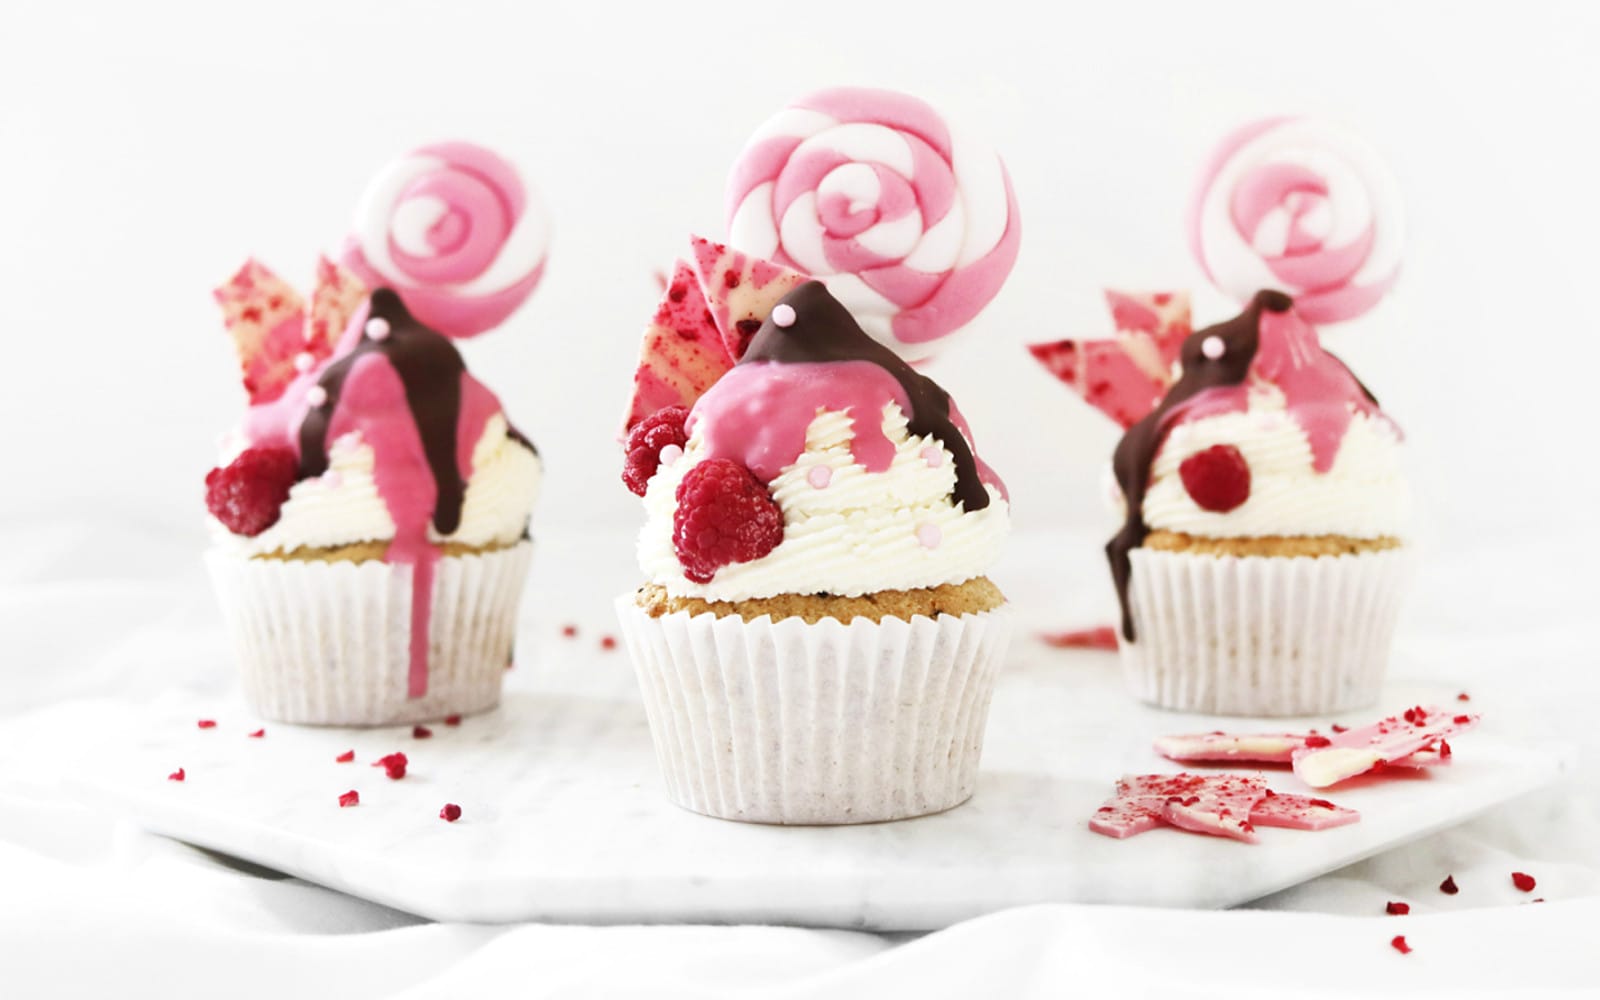 Candyland Raspberry Cupcakes